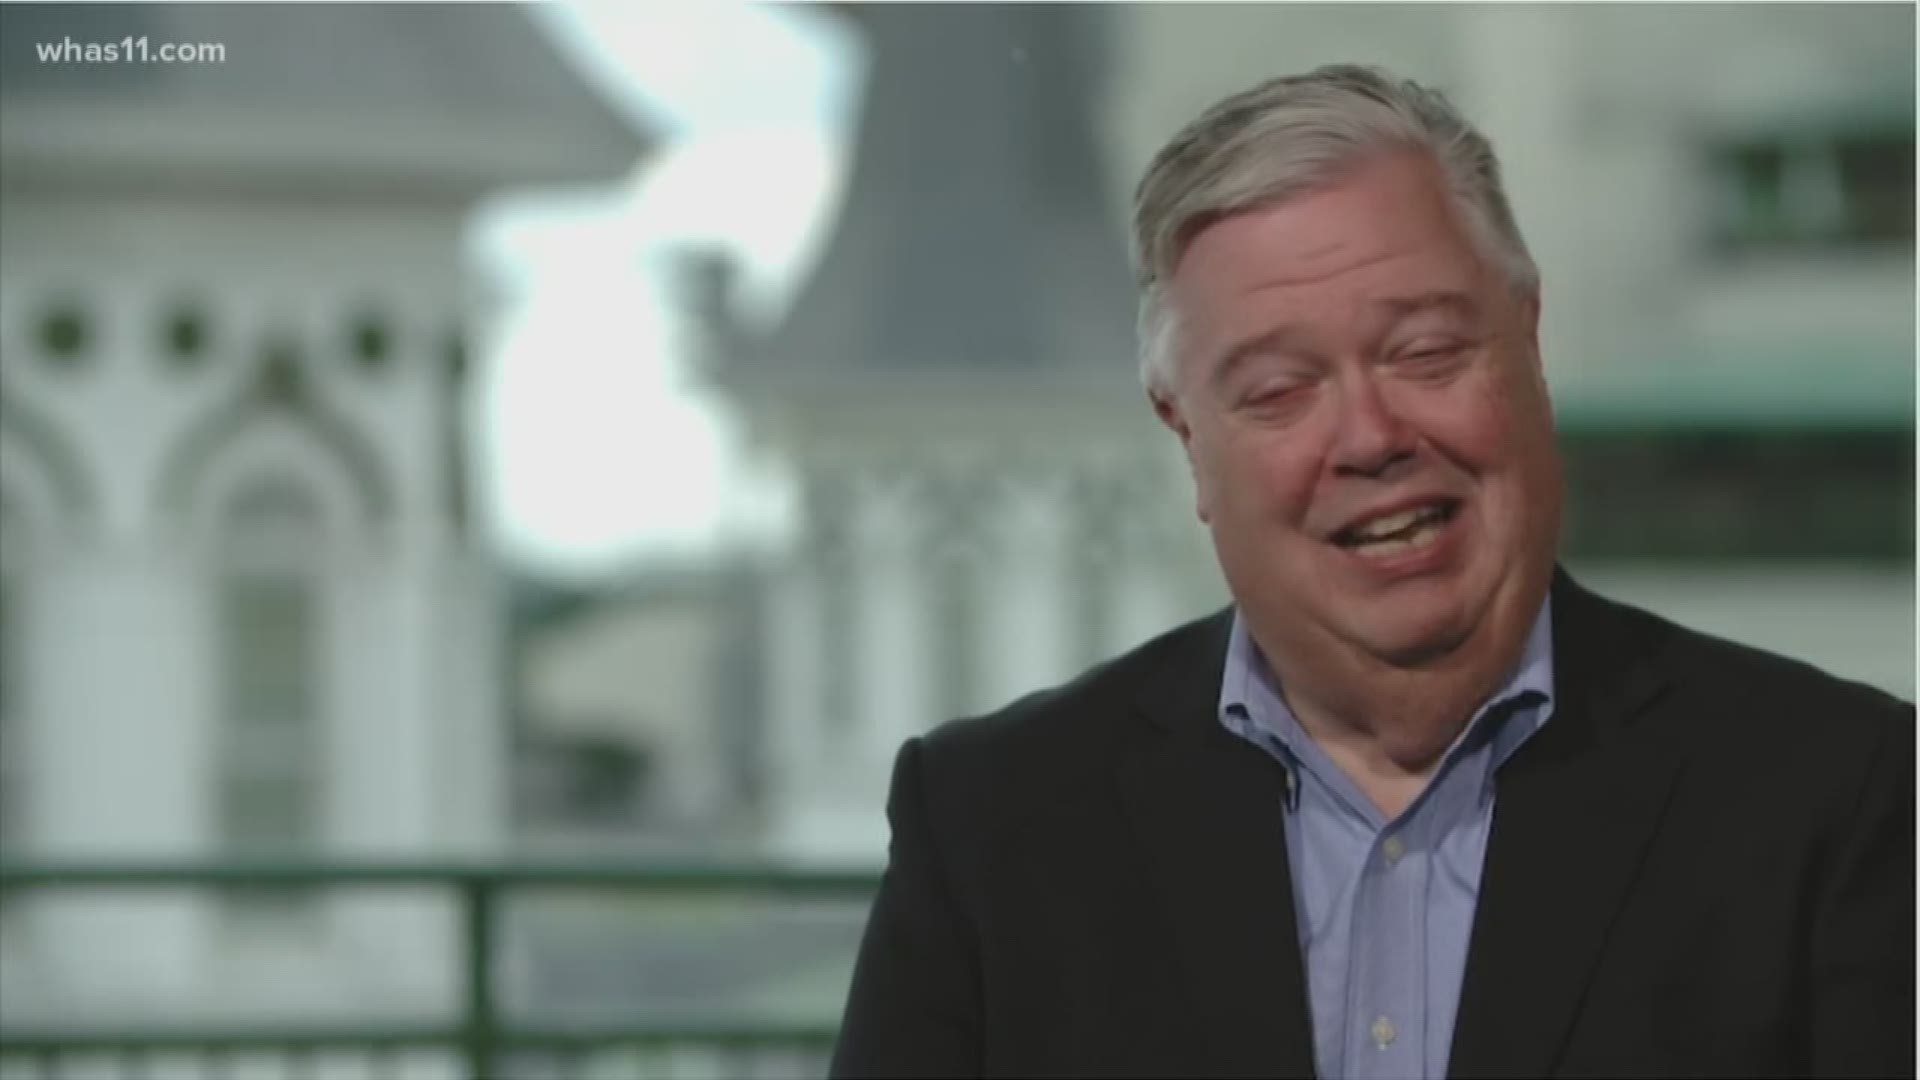 Derby week just won't be the same without Louisville's beloved John Asher.